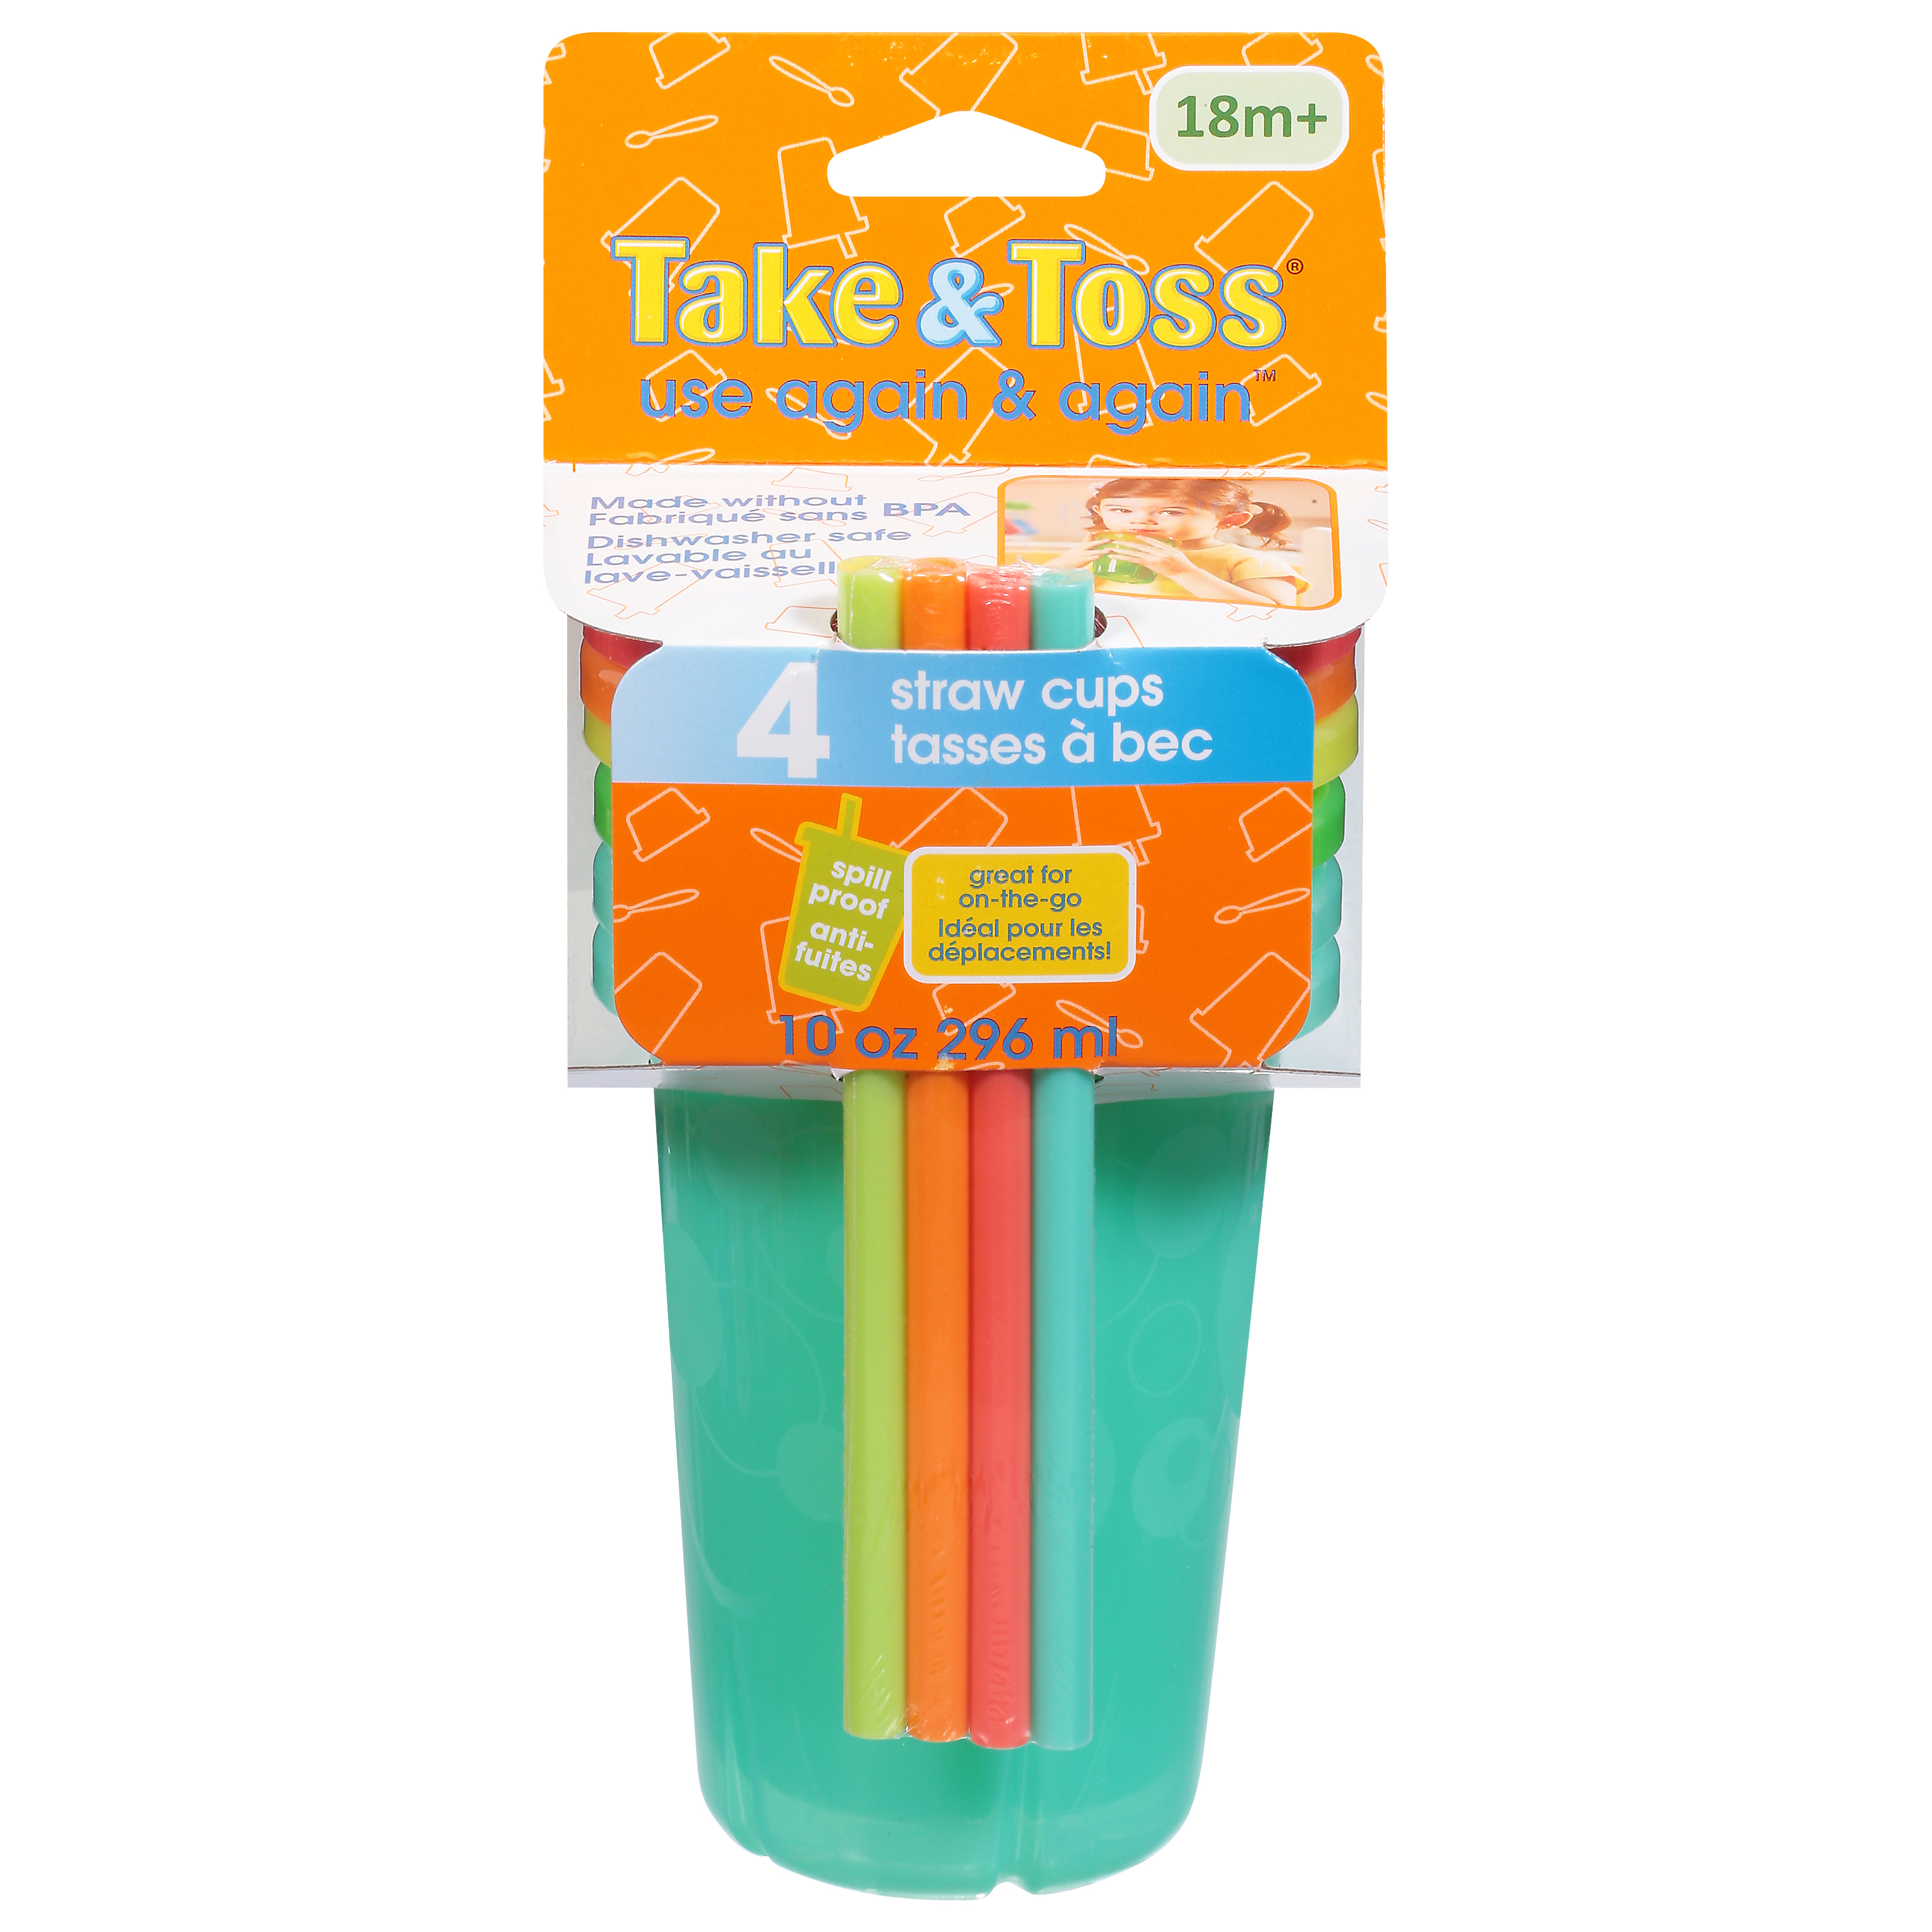 Take & Toss Straw Cups, 10 Oz Toddler Sippy Cups – 4 Pack - image 3 of 3